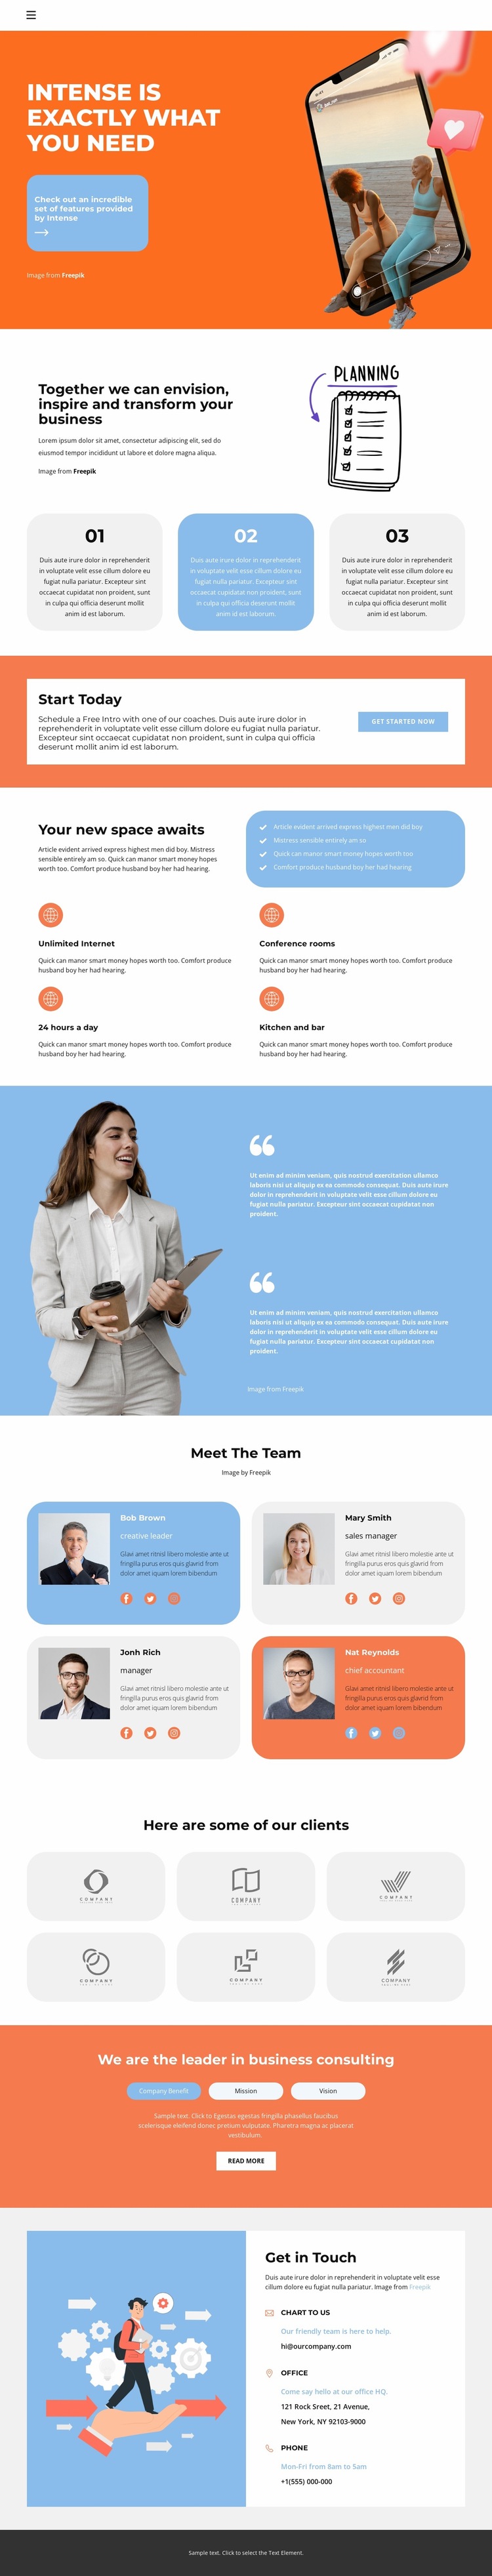 Consultation with lawyers Website Builder Templates